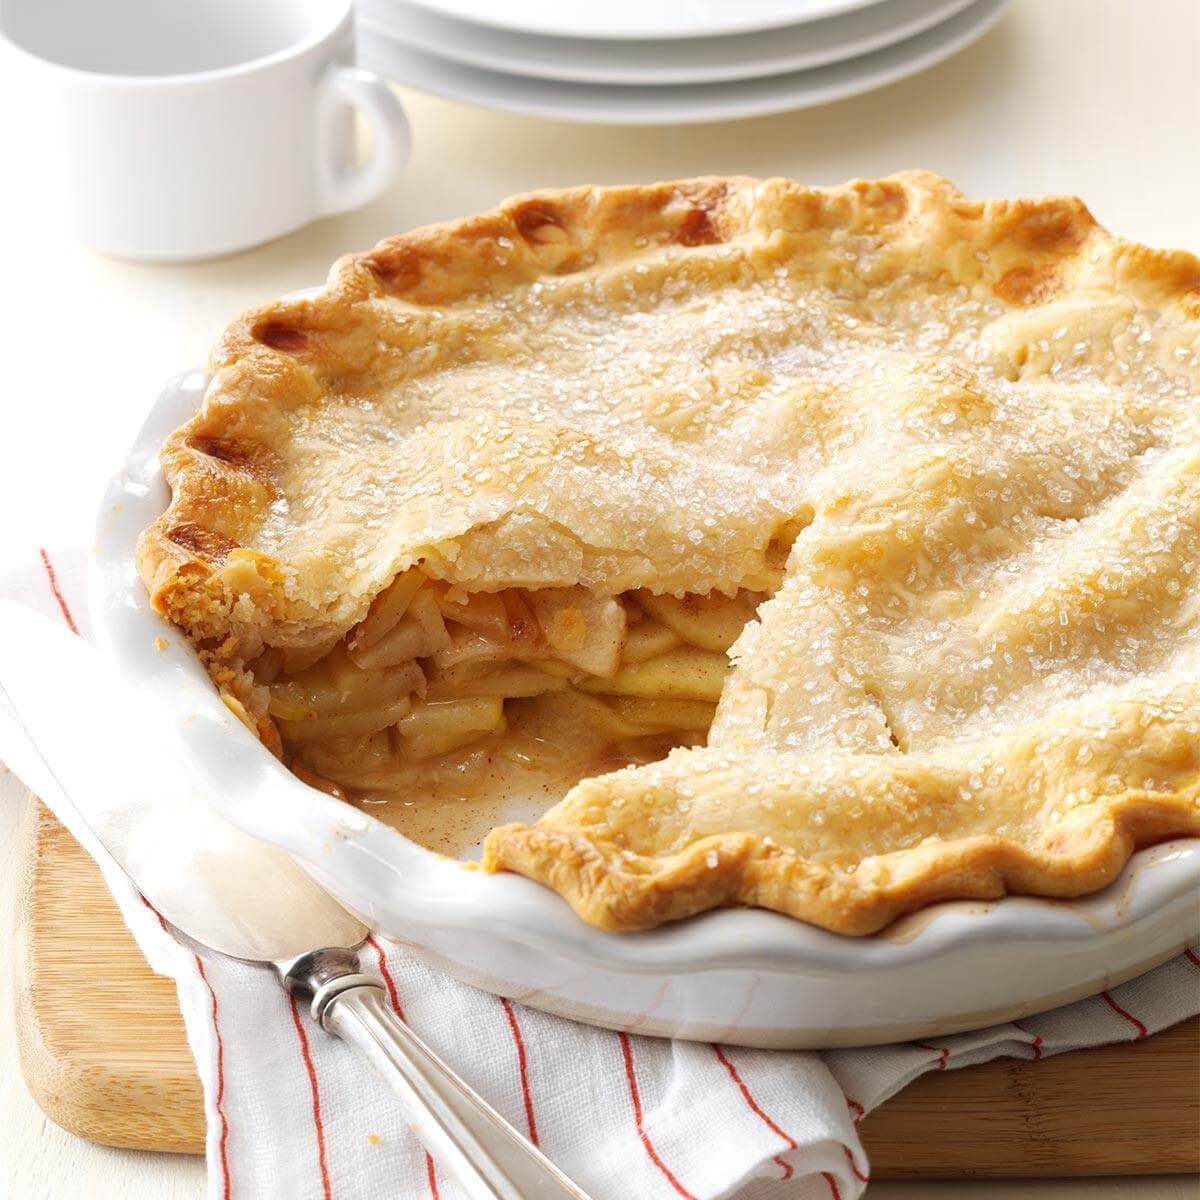 A close-up of a slice of apple pie, with a flaky crust and a gooey filling bursting with cinnamon and apples.